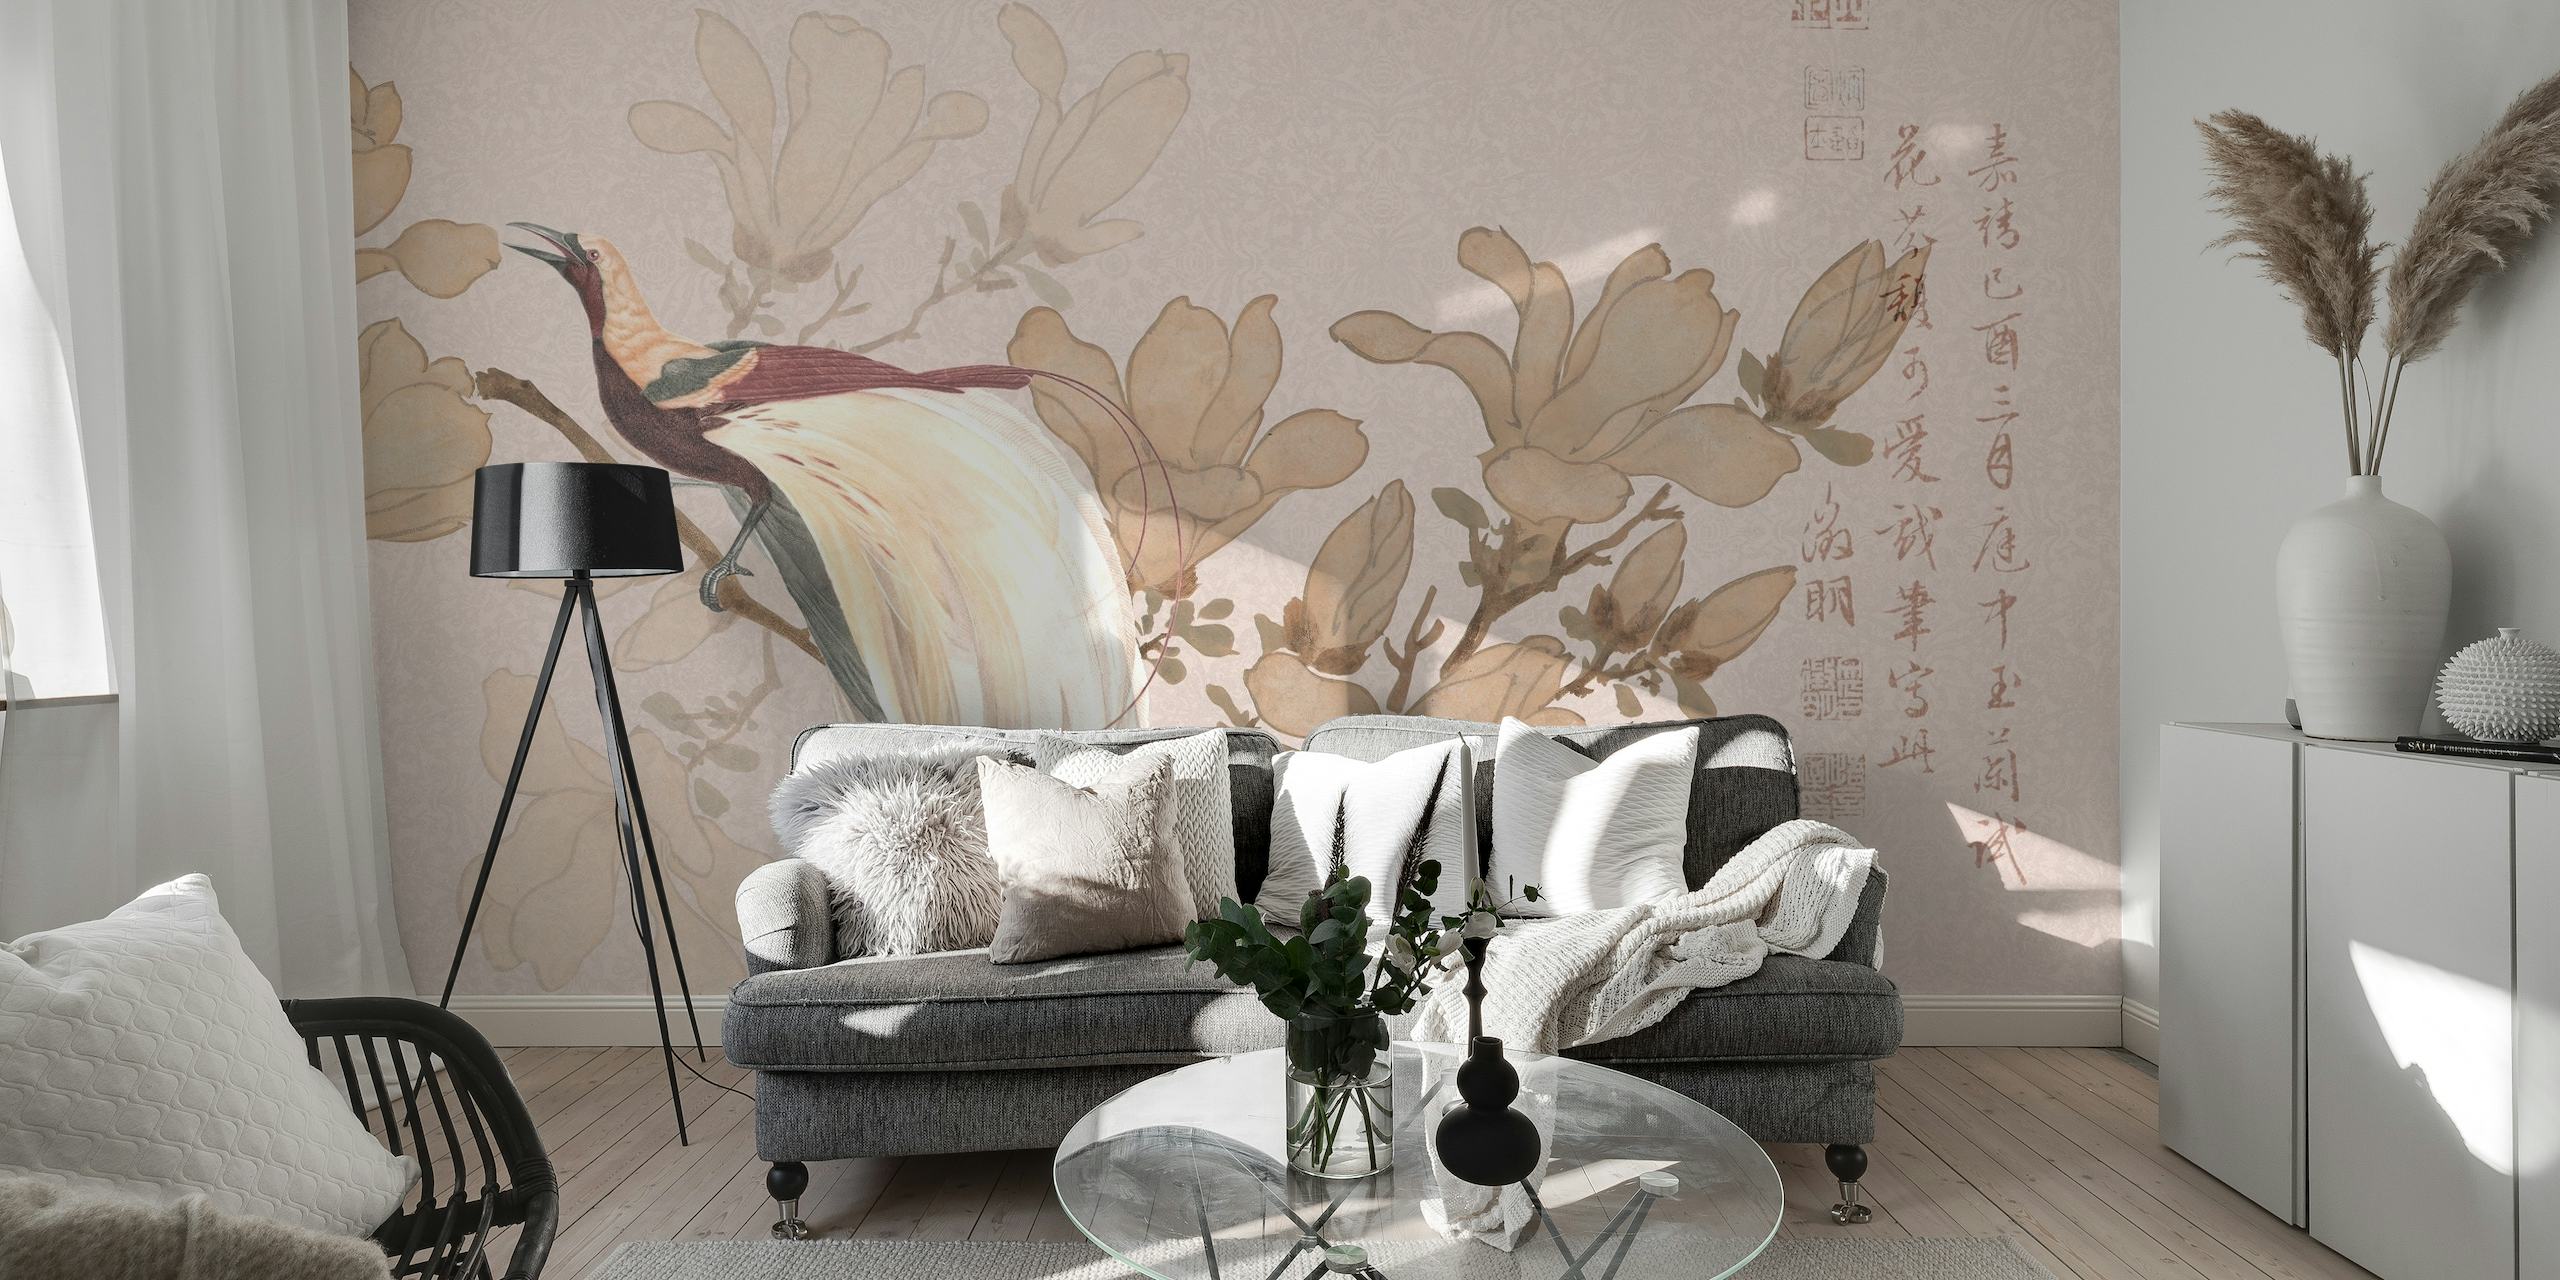 Elegant Bird of Paradise Chinoiserie wall mural with soft floral elements and Asian-inspired artistic style